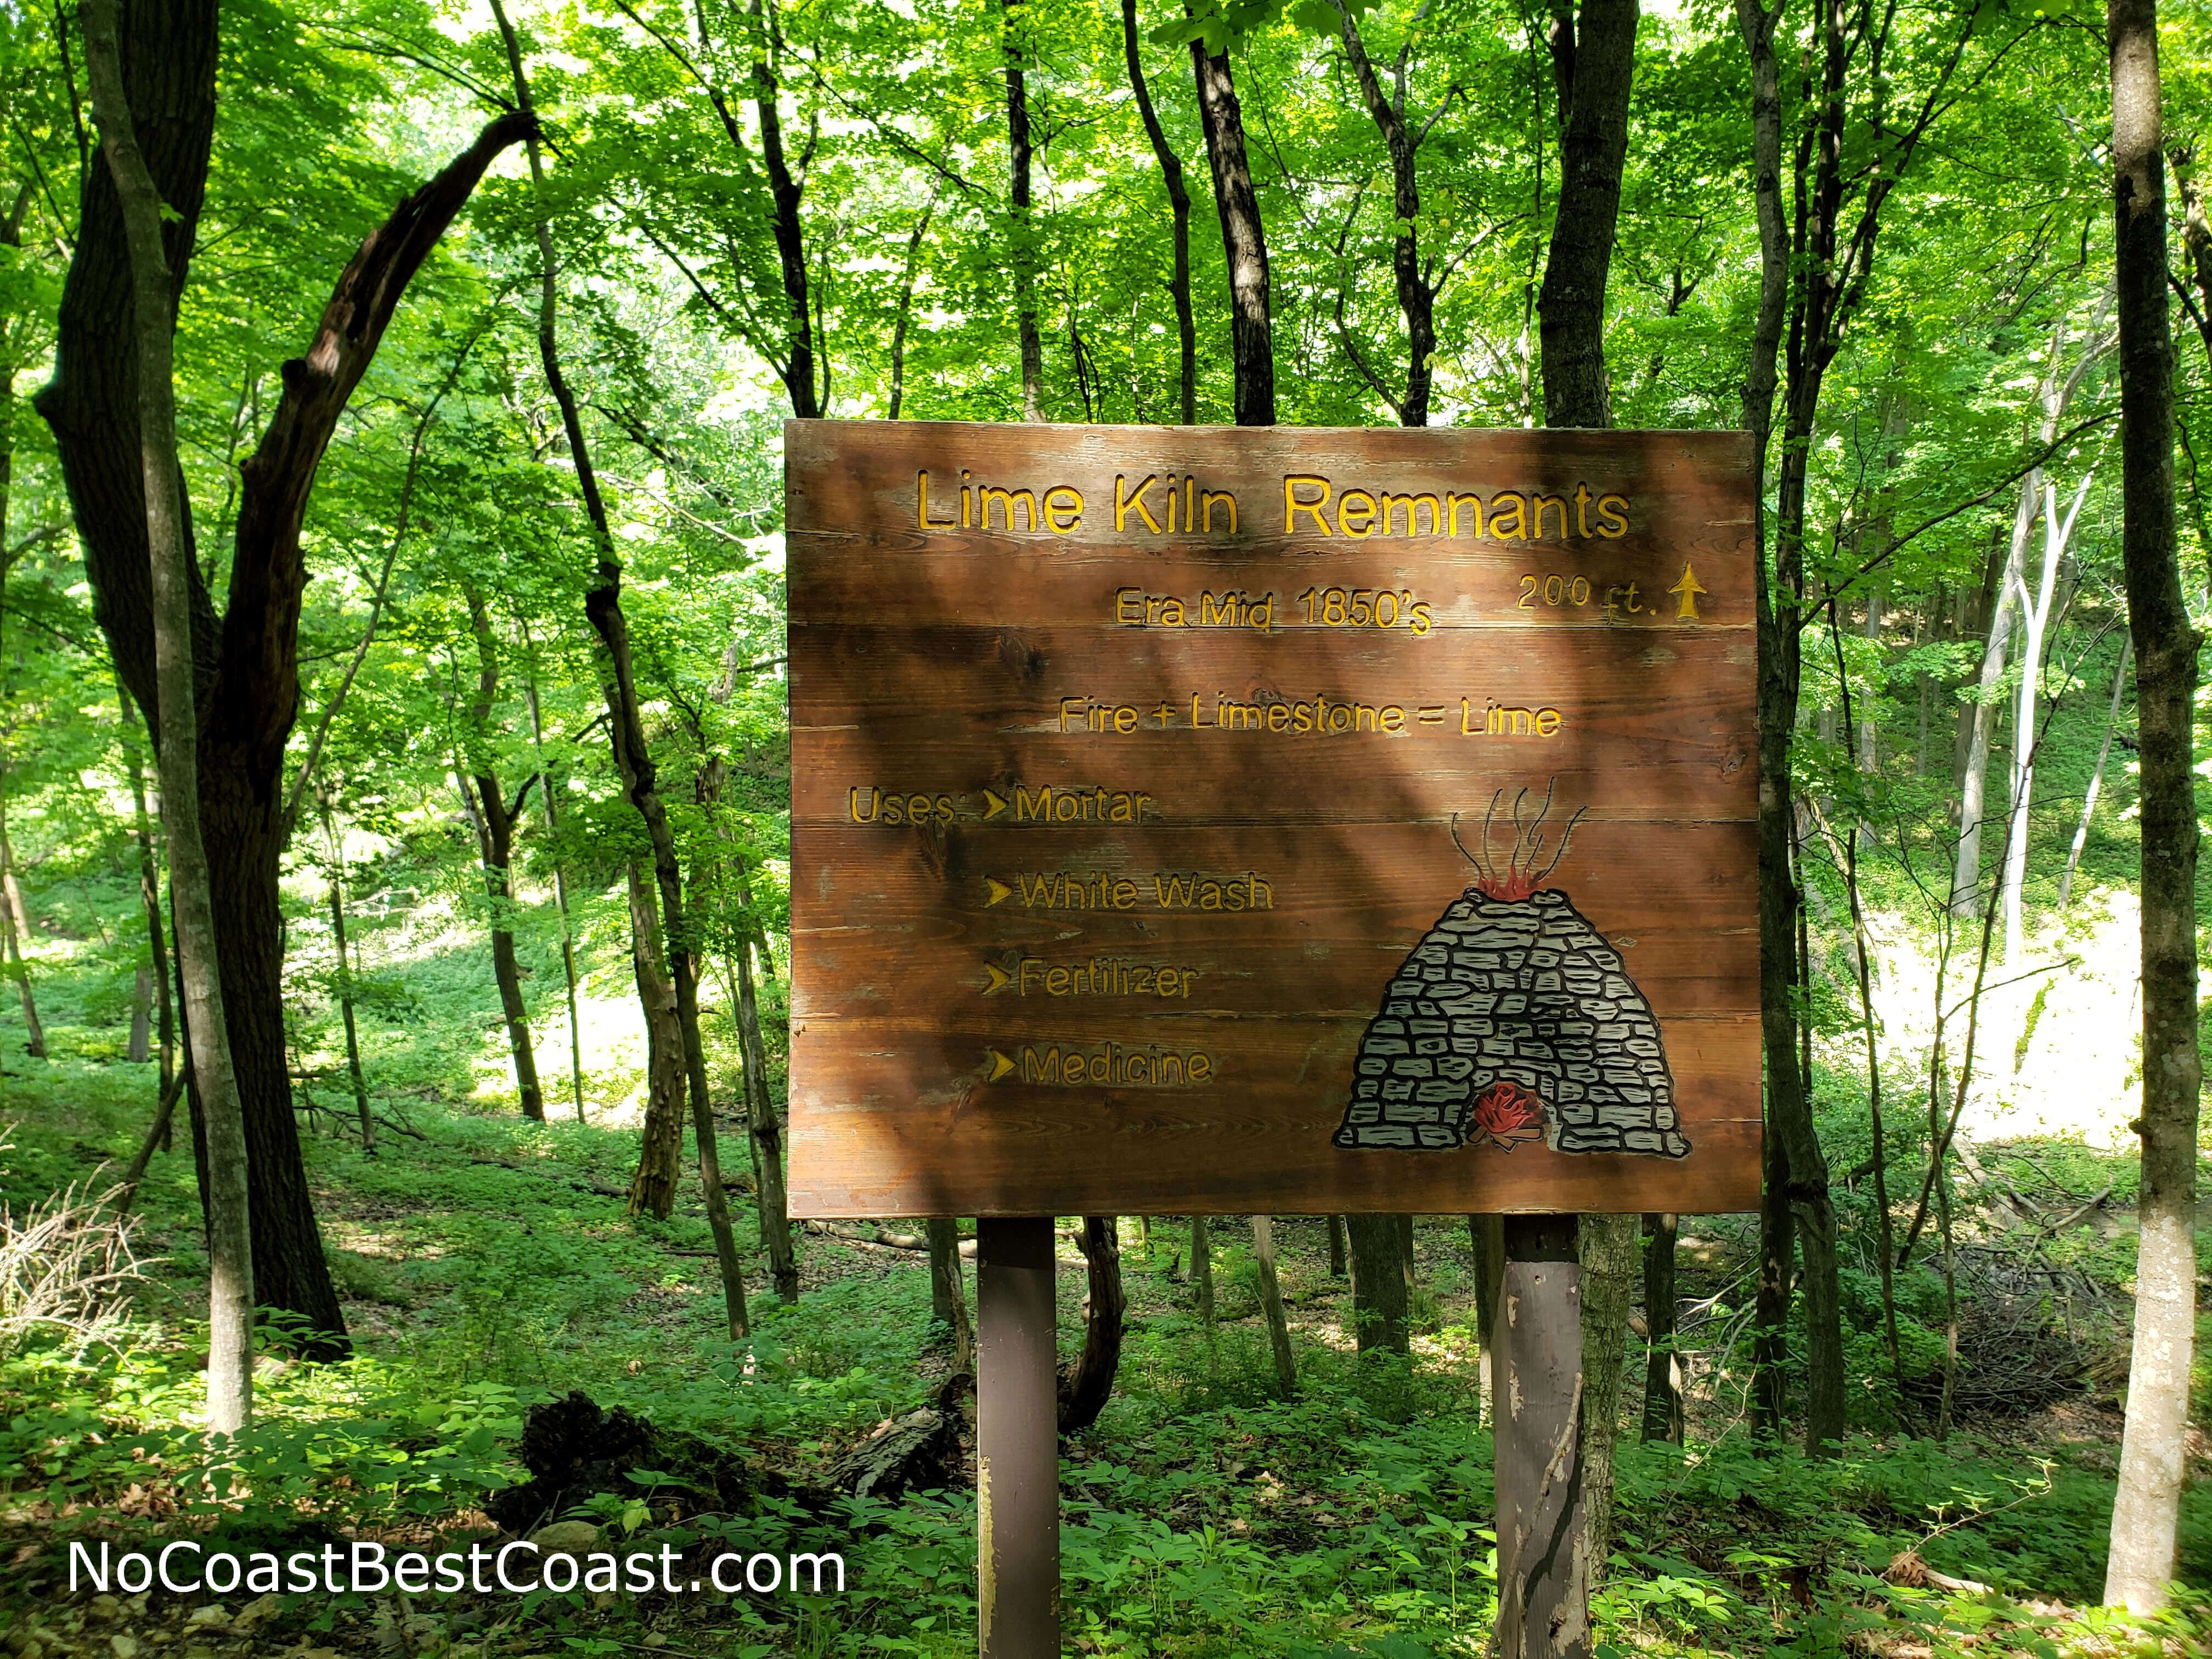 This sign marks the lime kiln ruins which can be seen further down the ravine.